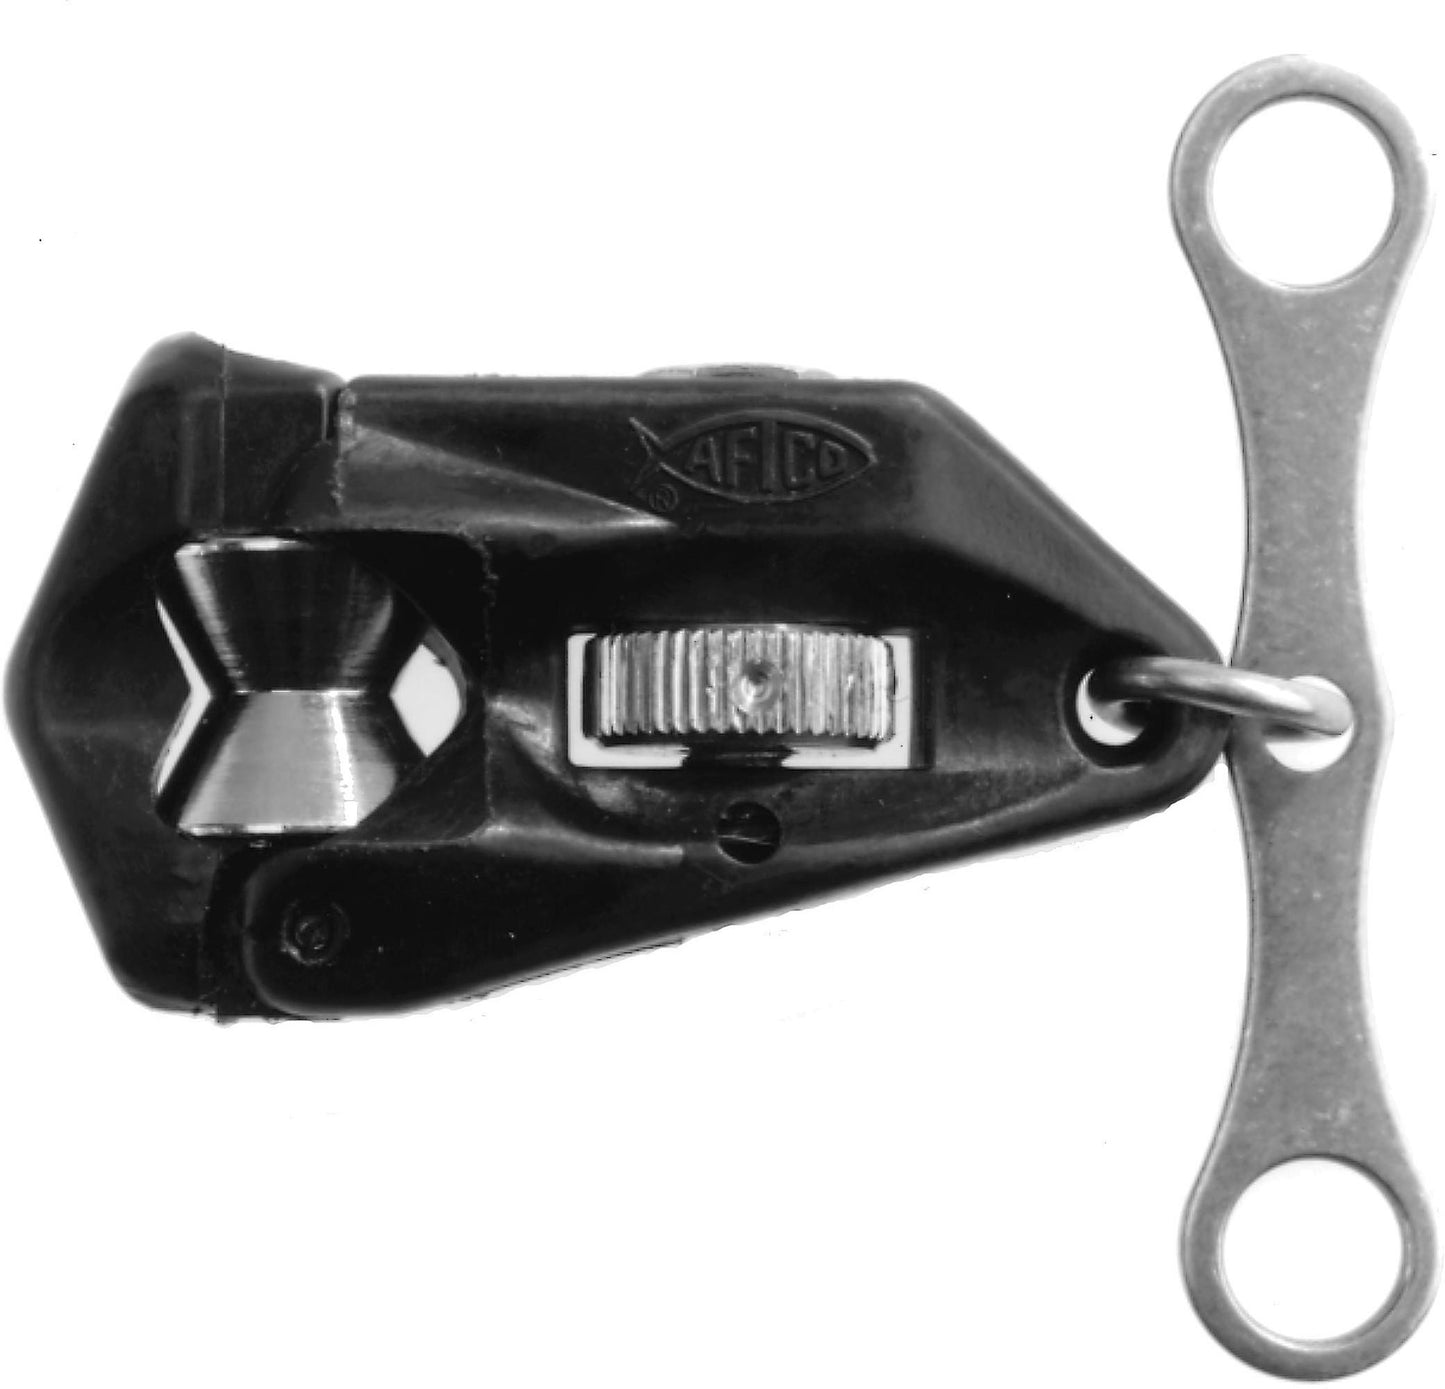 AFTCO OR1B Outrigger Clips Pair